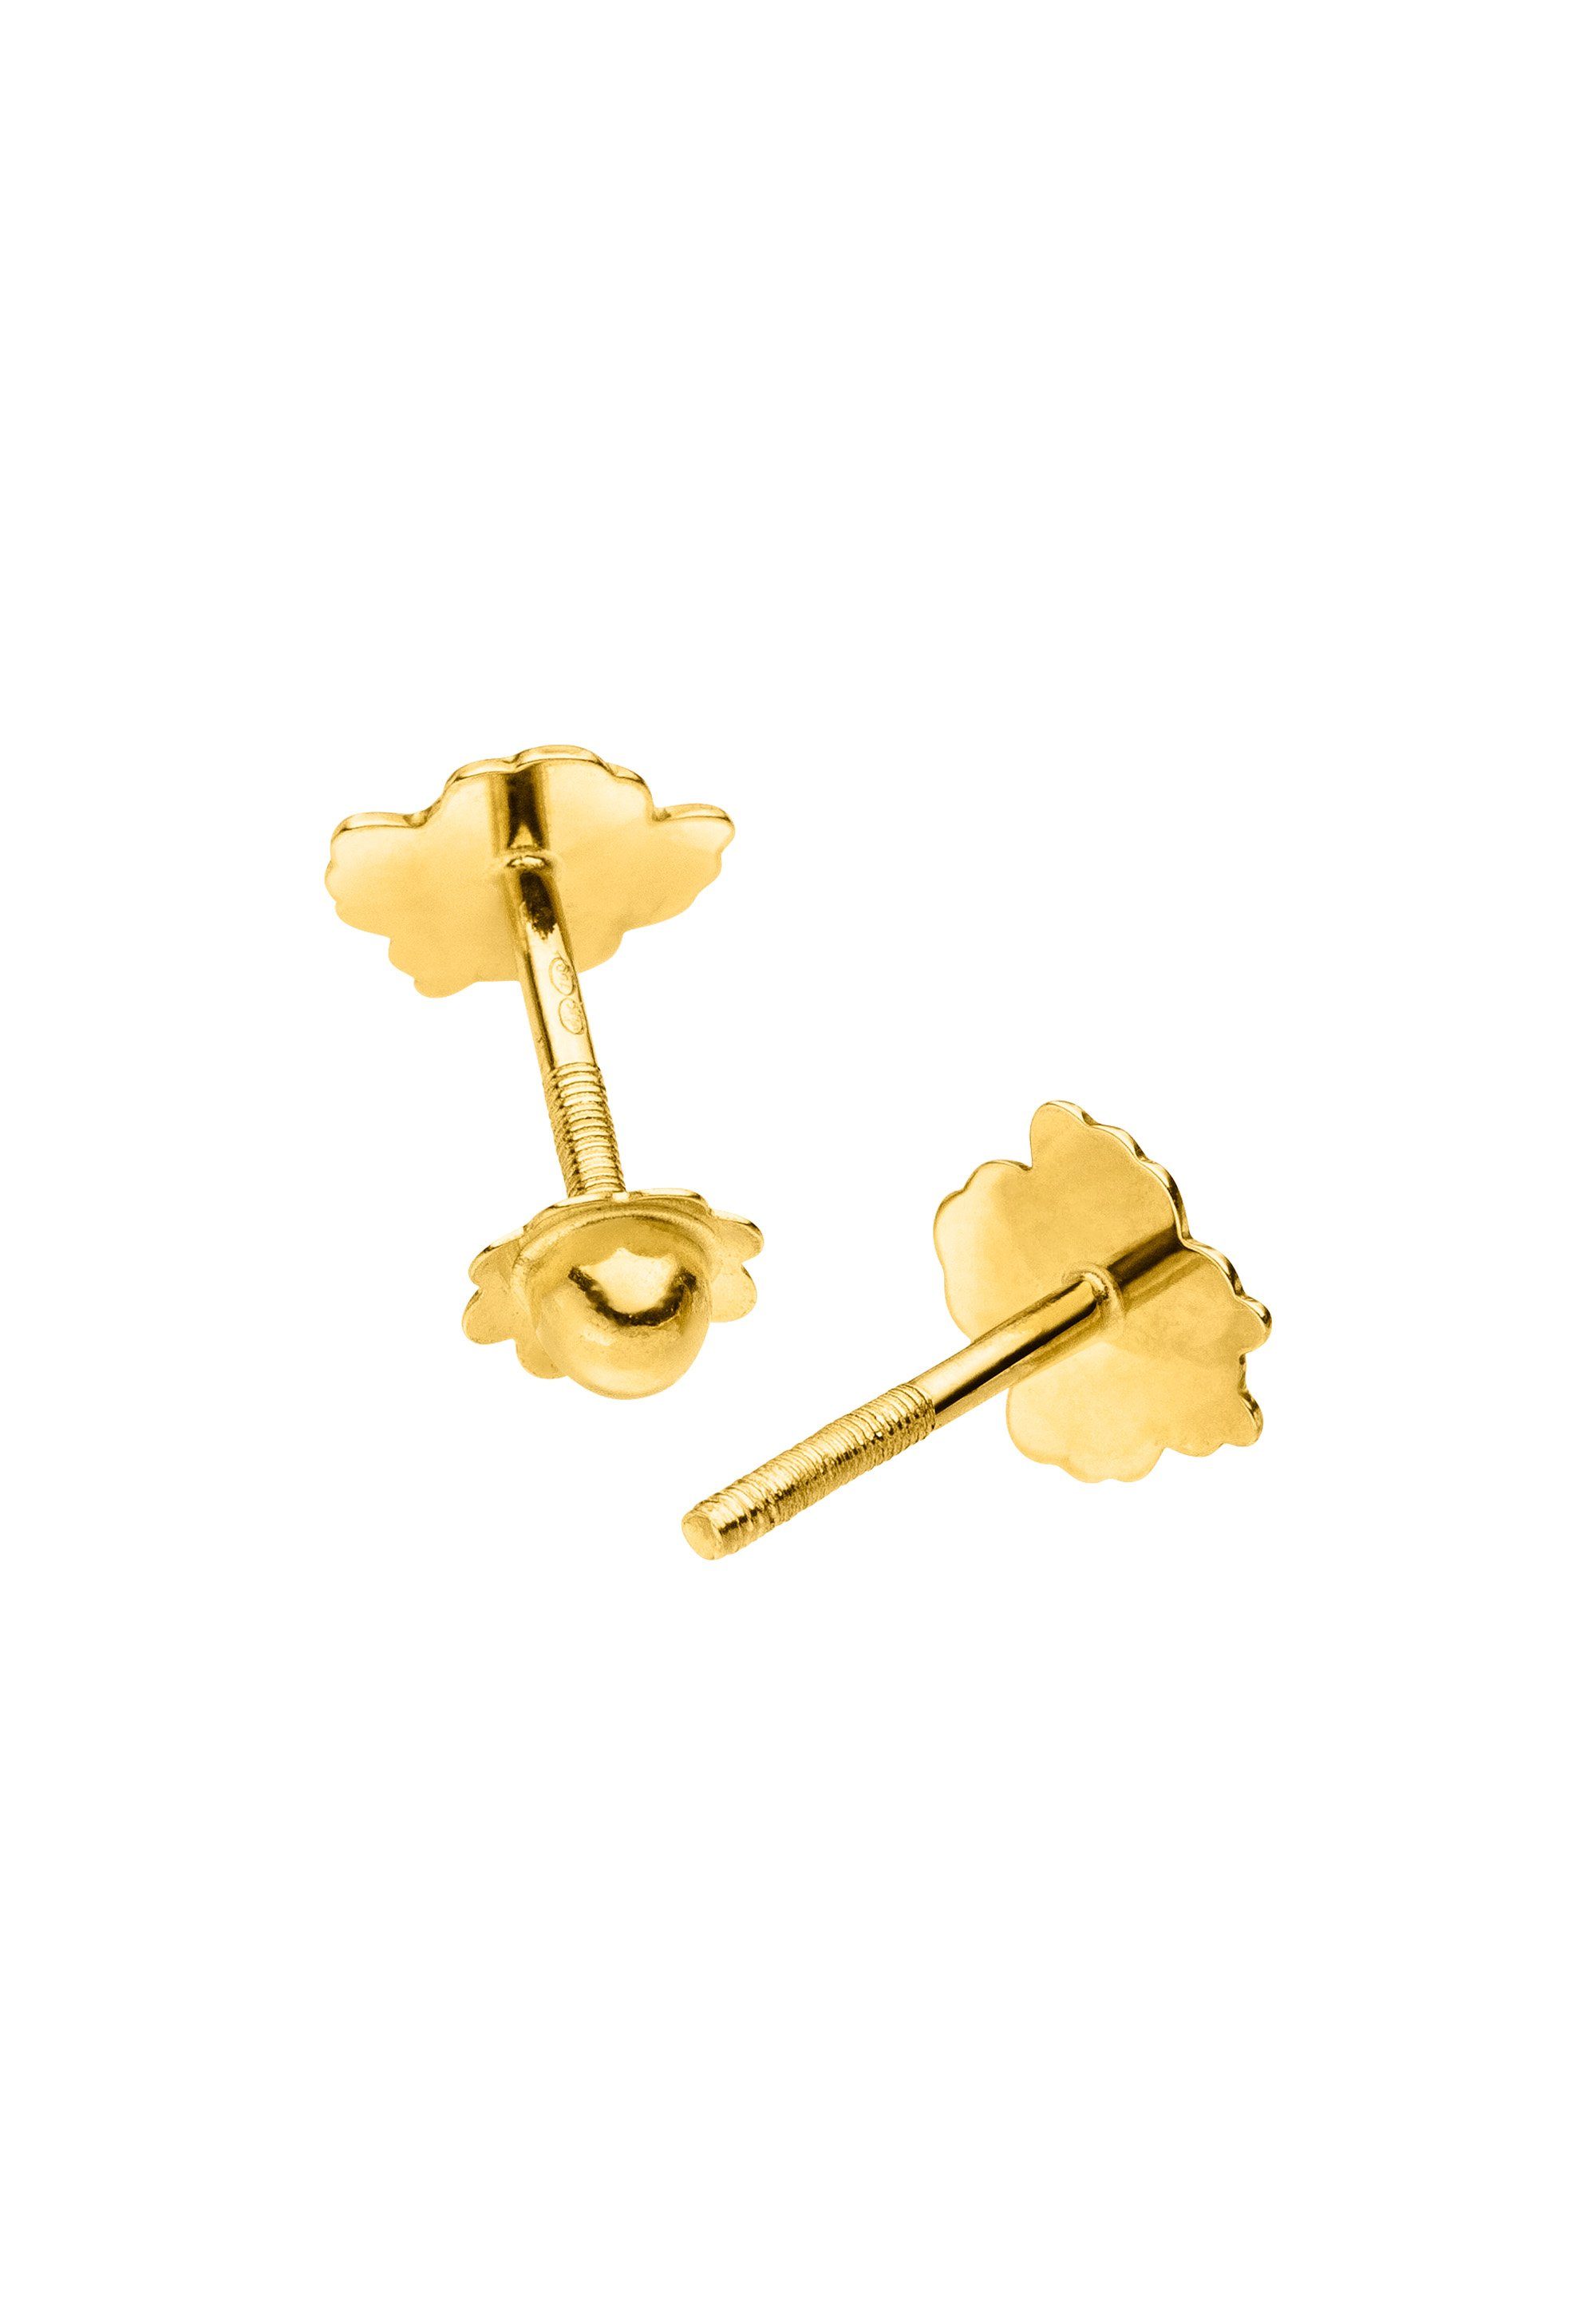 NANA KAY Paar Ohrstecker Nana Kay Gold for Kids, mit Emaille